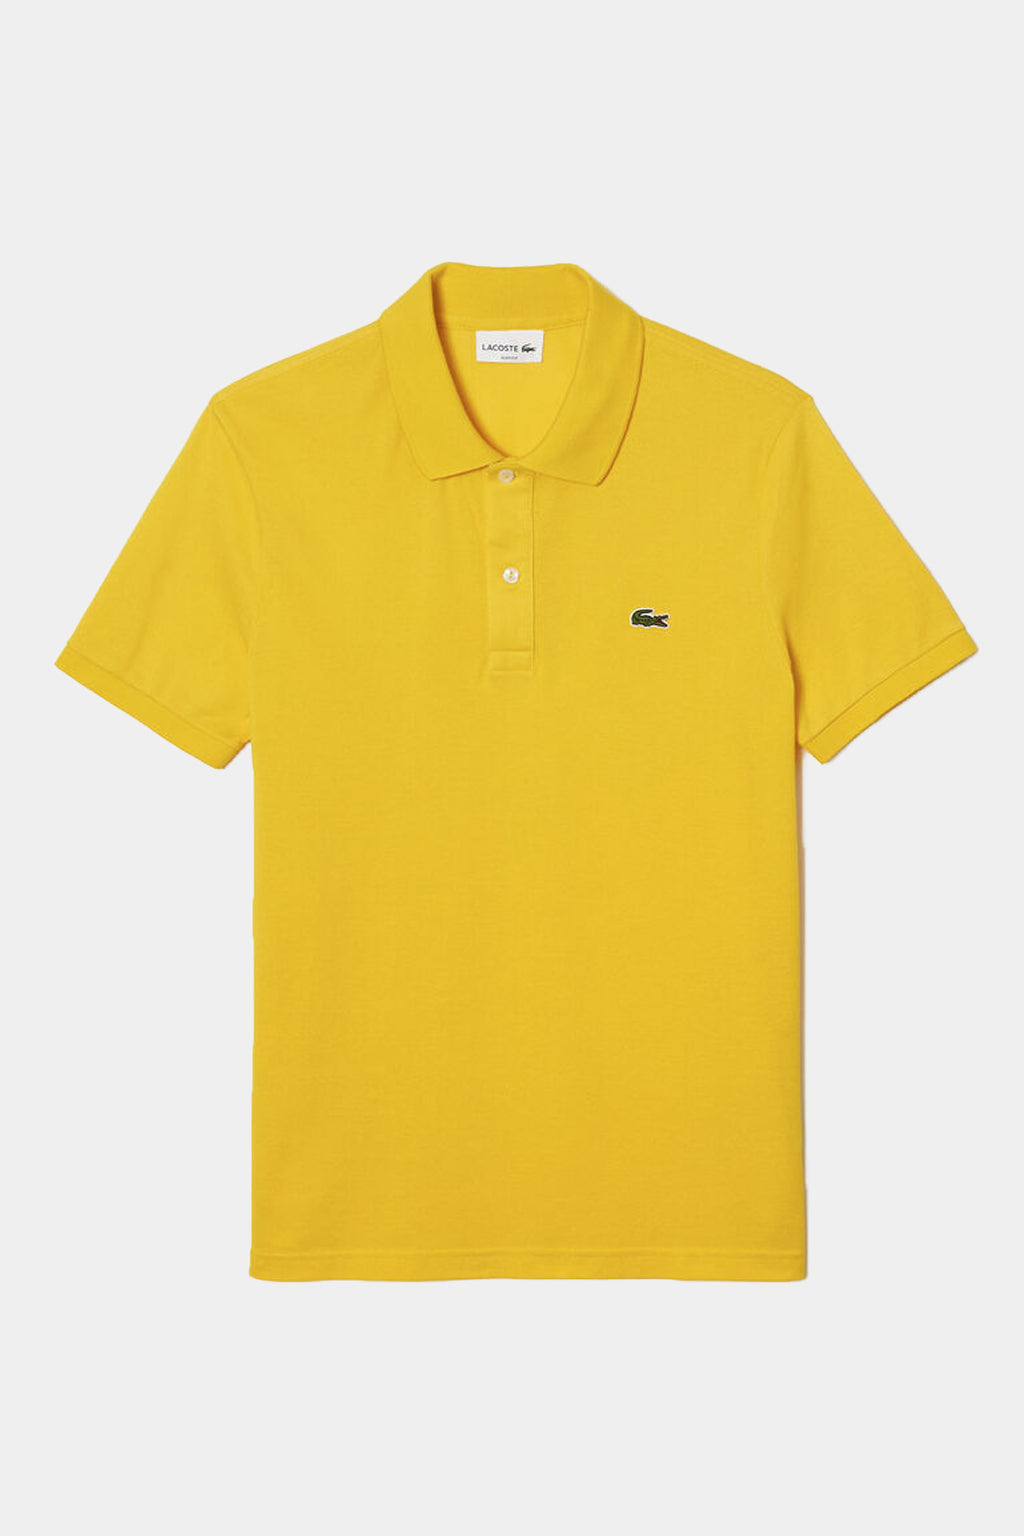 Lacoste Shirt Polo Slim Fit From A Fine Peak